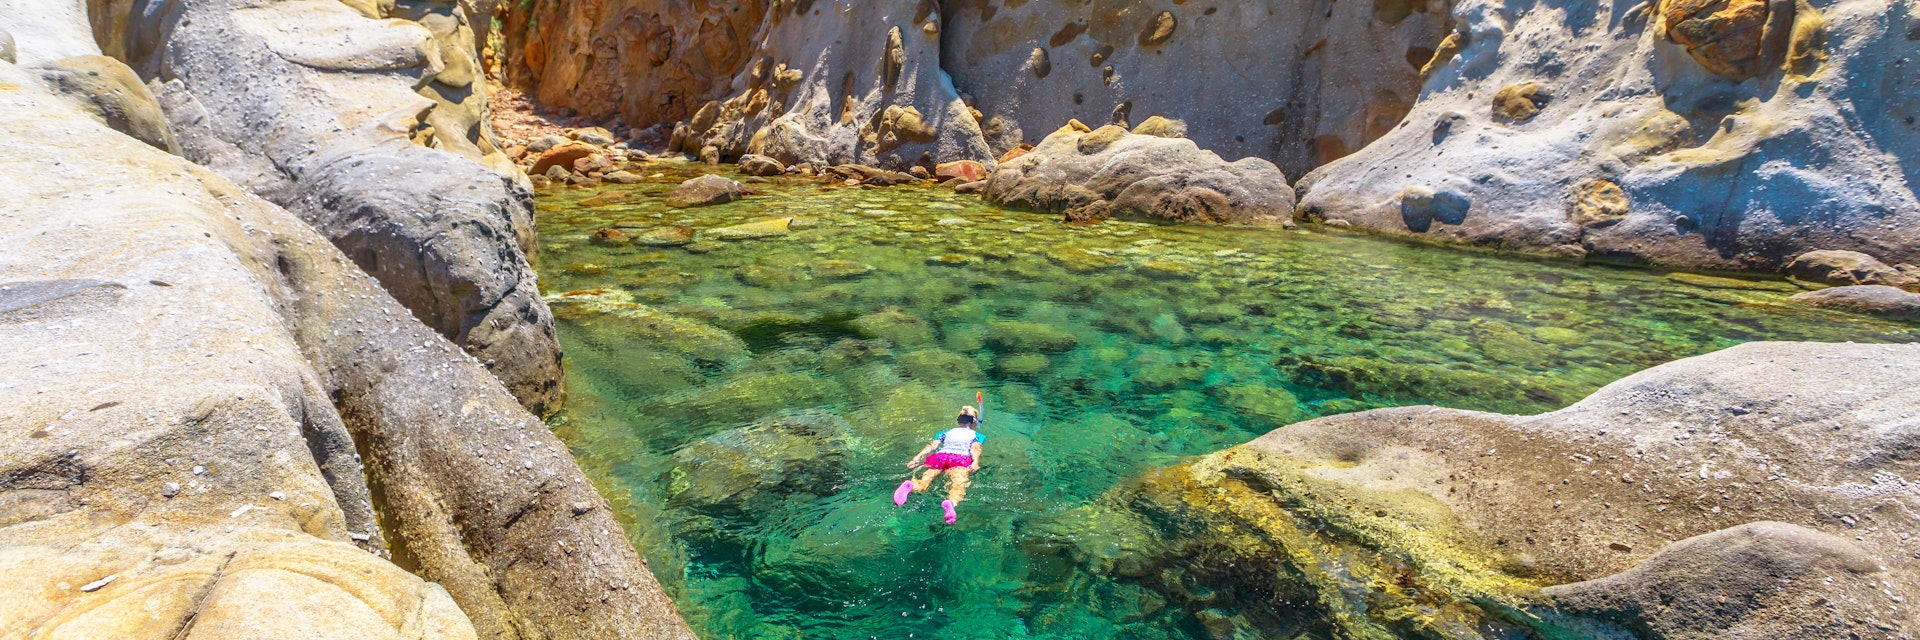 Top view of snorkeler in Sant 'Andrea beach Cote Piane side with rocks and coves, Elba island. Woman in clear waters of Tyrrhenian sea on holiday travel, Italy. Saint Andrew is popular seaside resort.